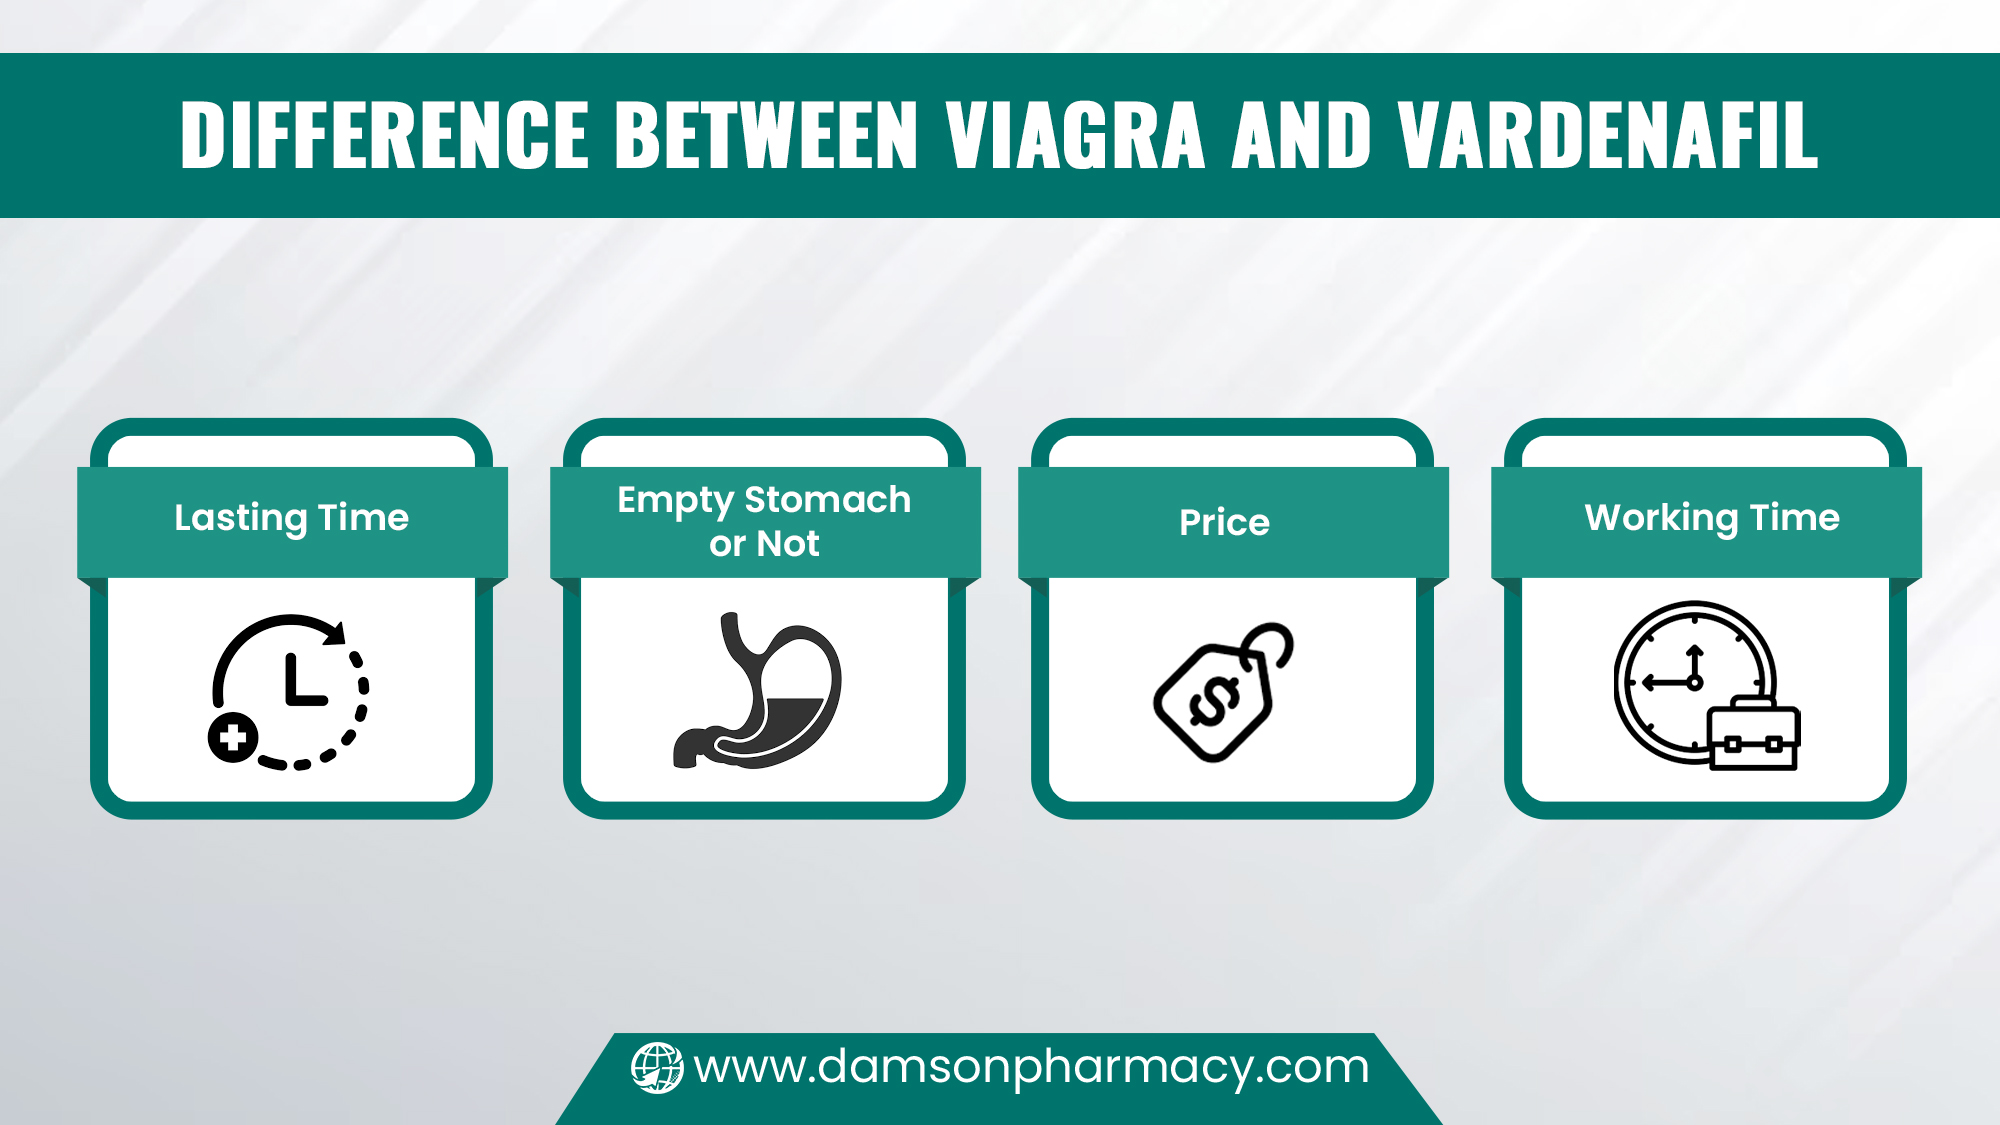 Difference between Viagra and Vardenafil